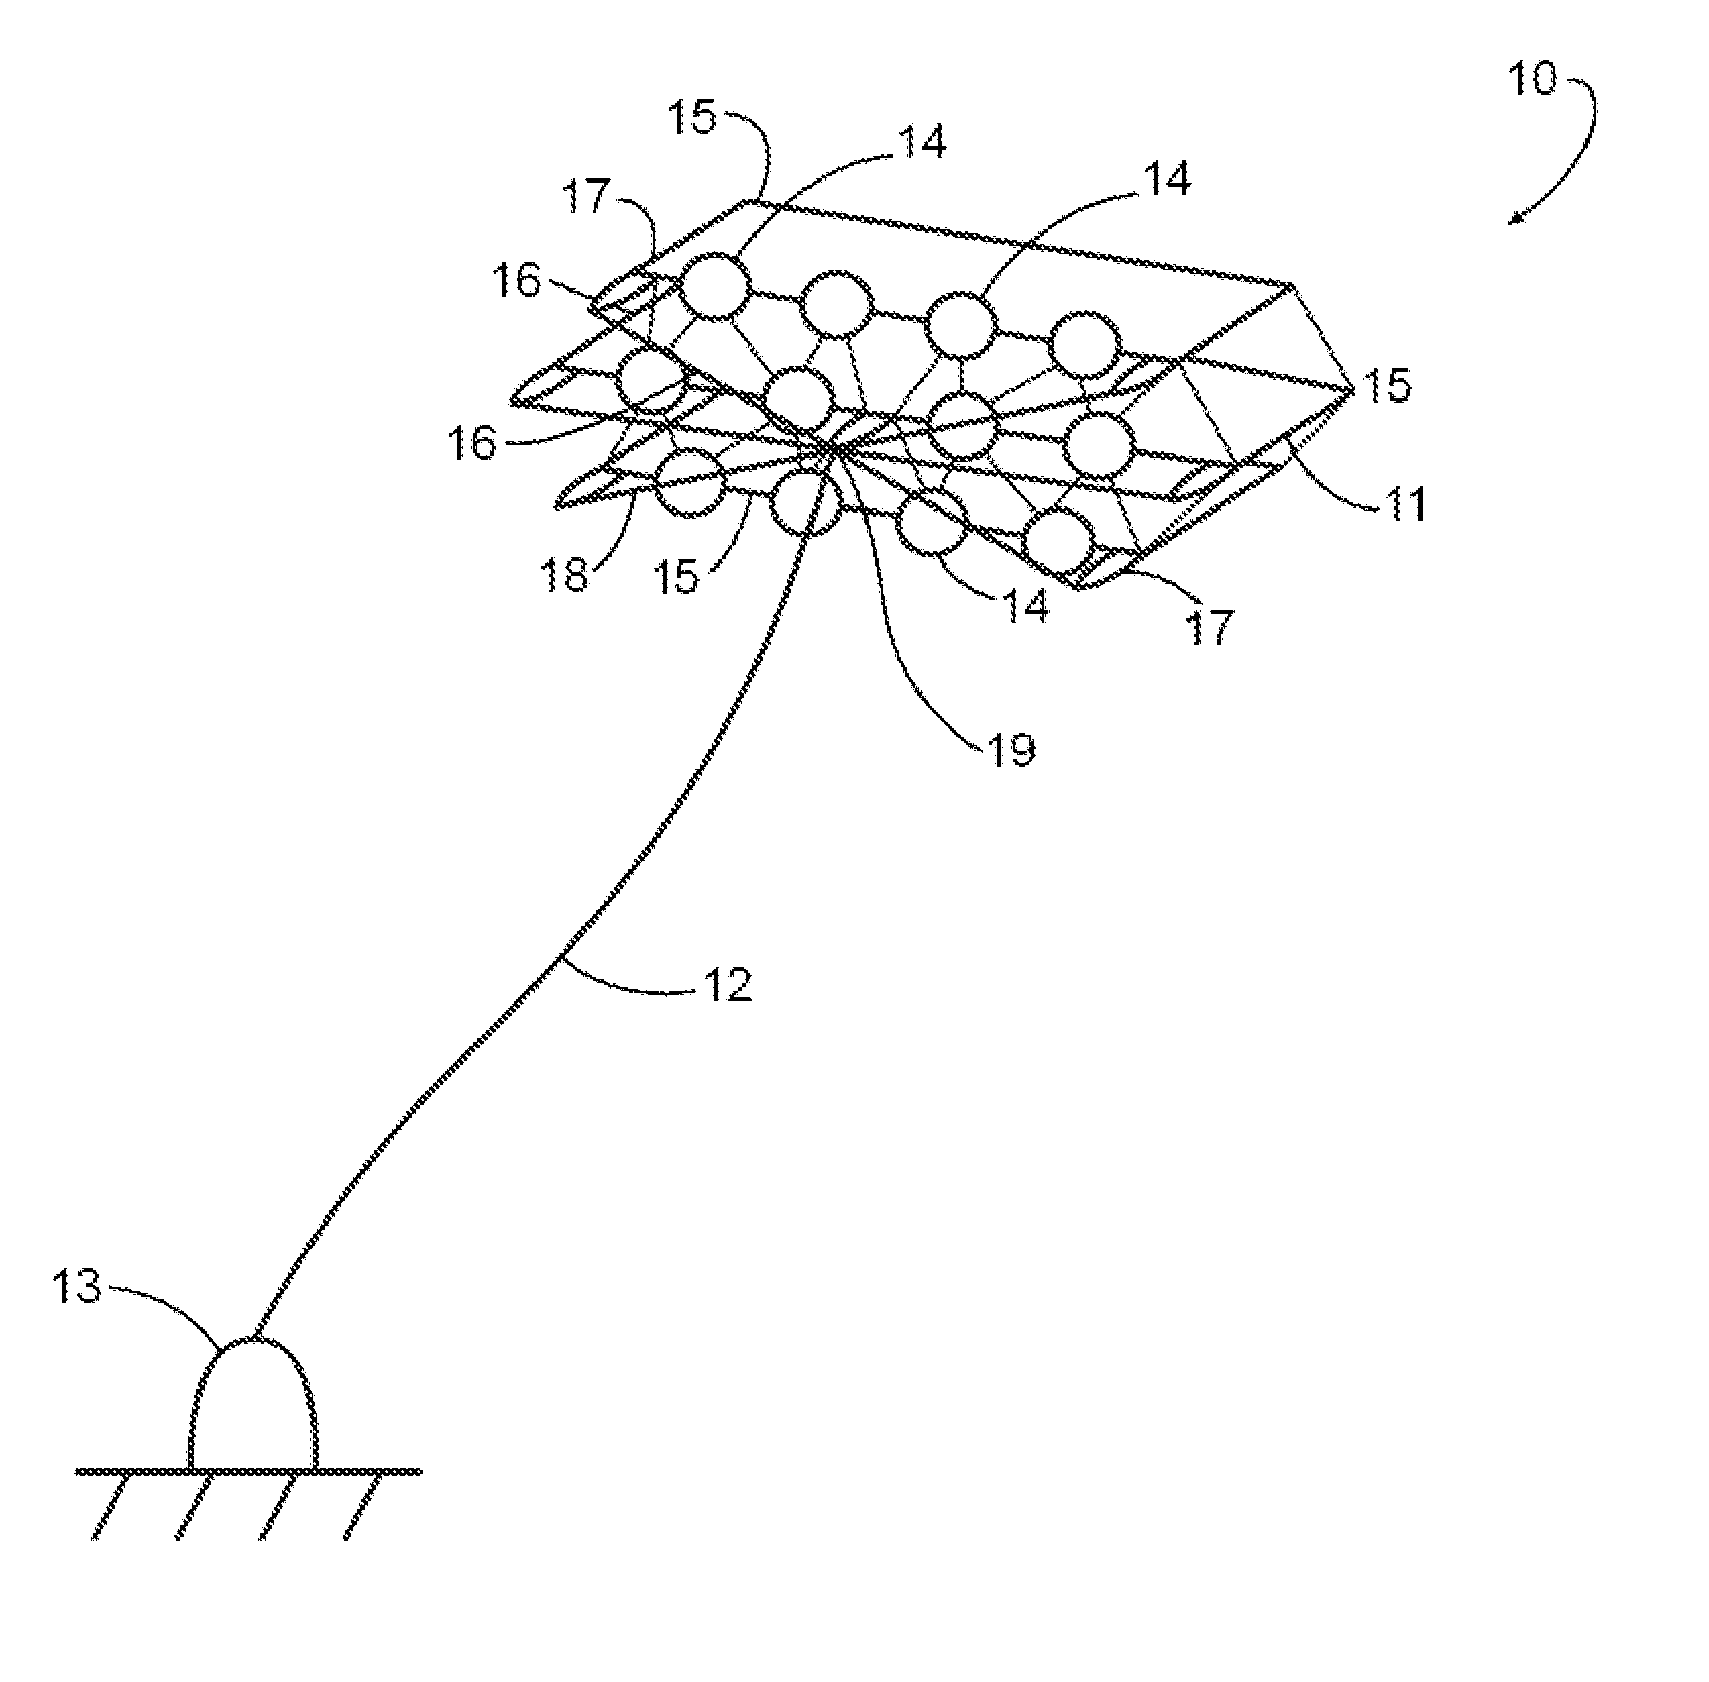 Tethered Airborne Power Generation System With Vertical Take-Off and Landing Capability